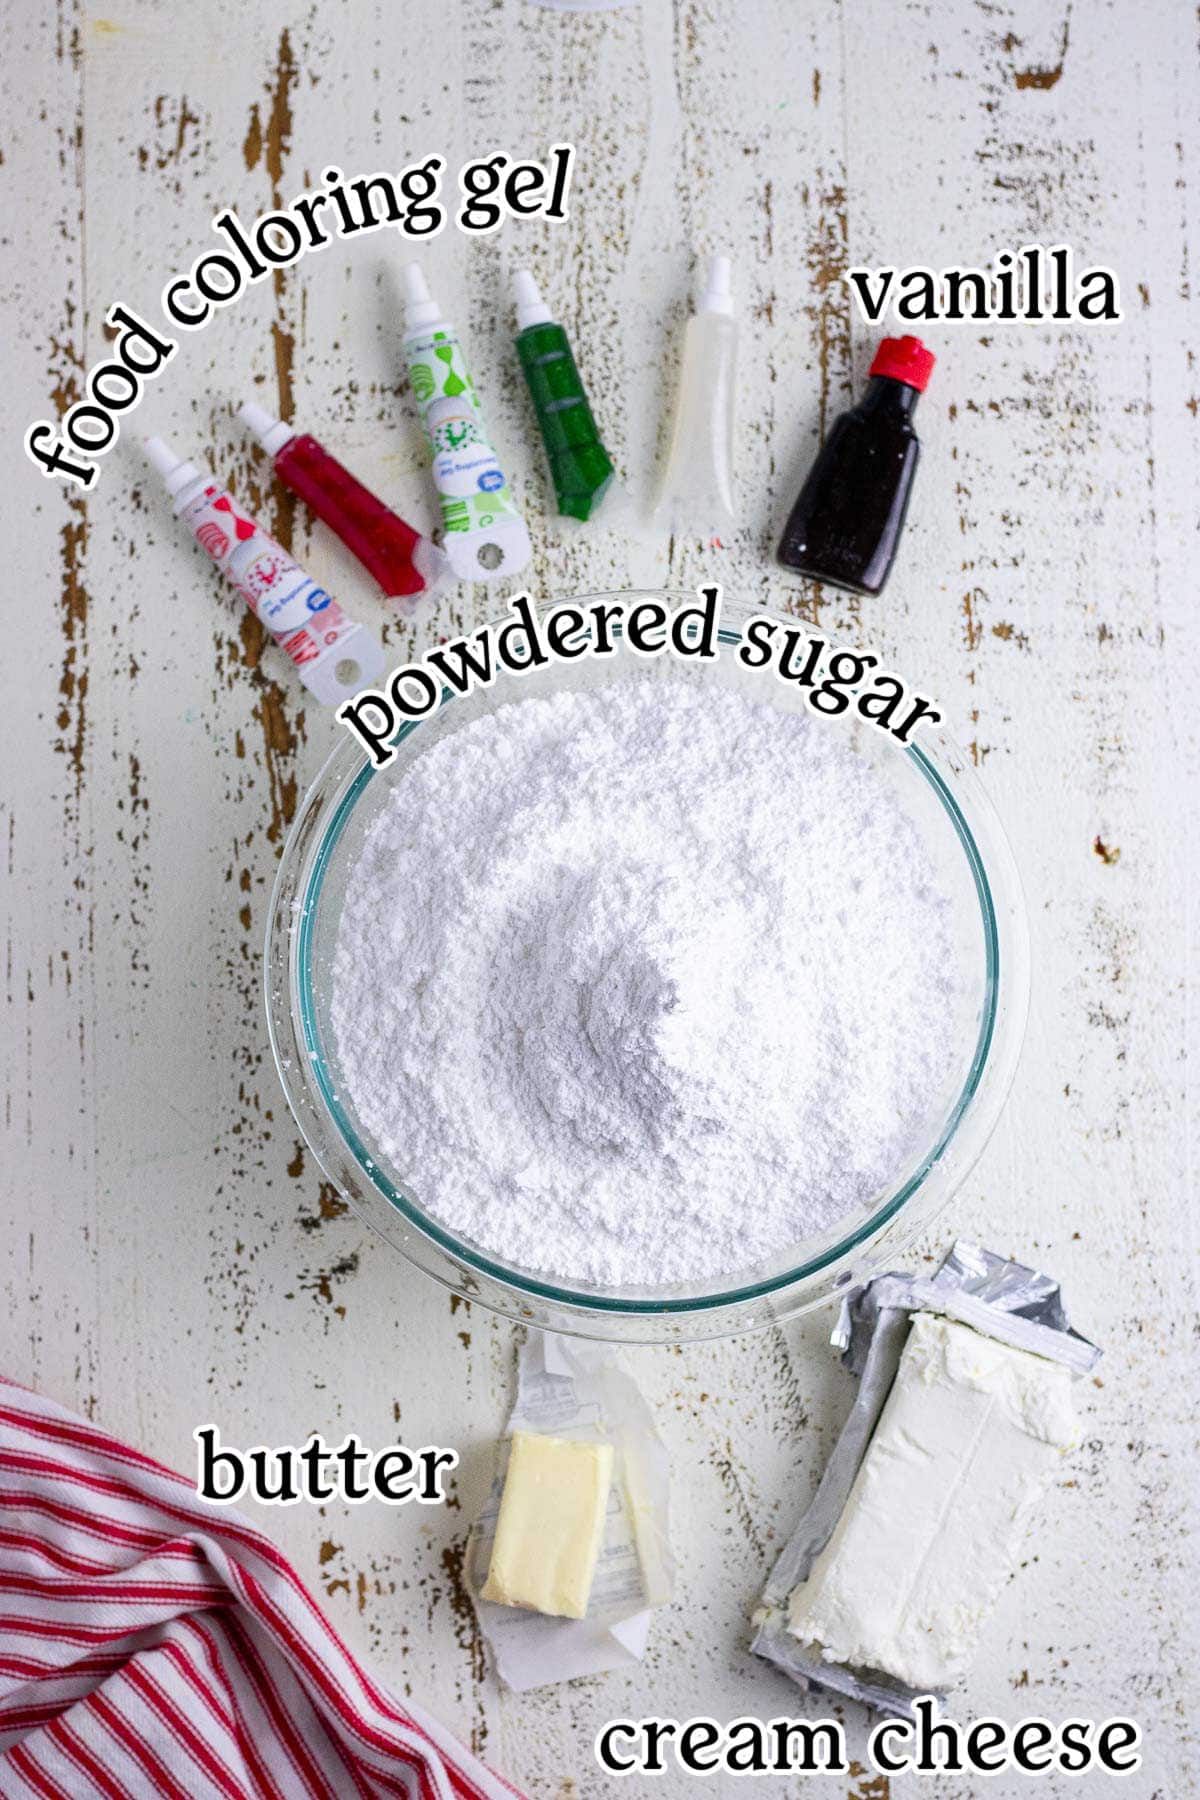 An overhead image with text overlay showing the main recipe ingredients.